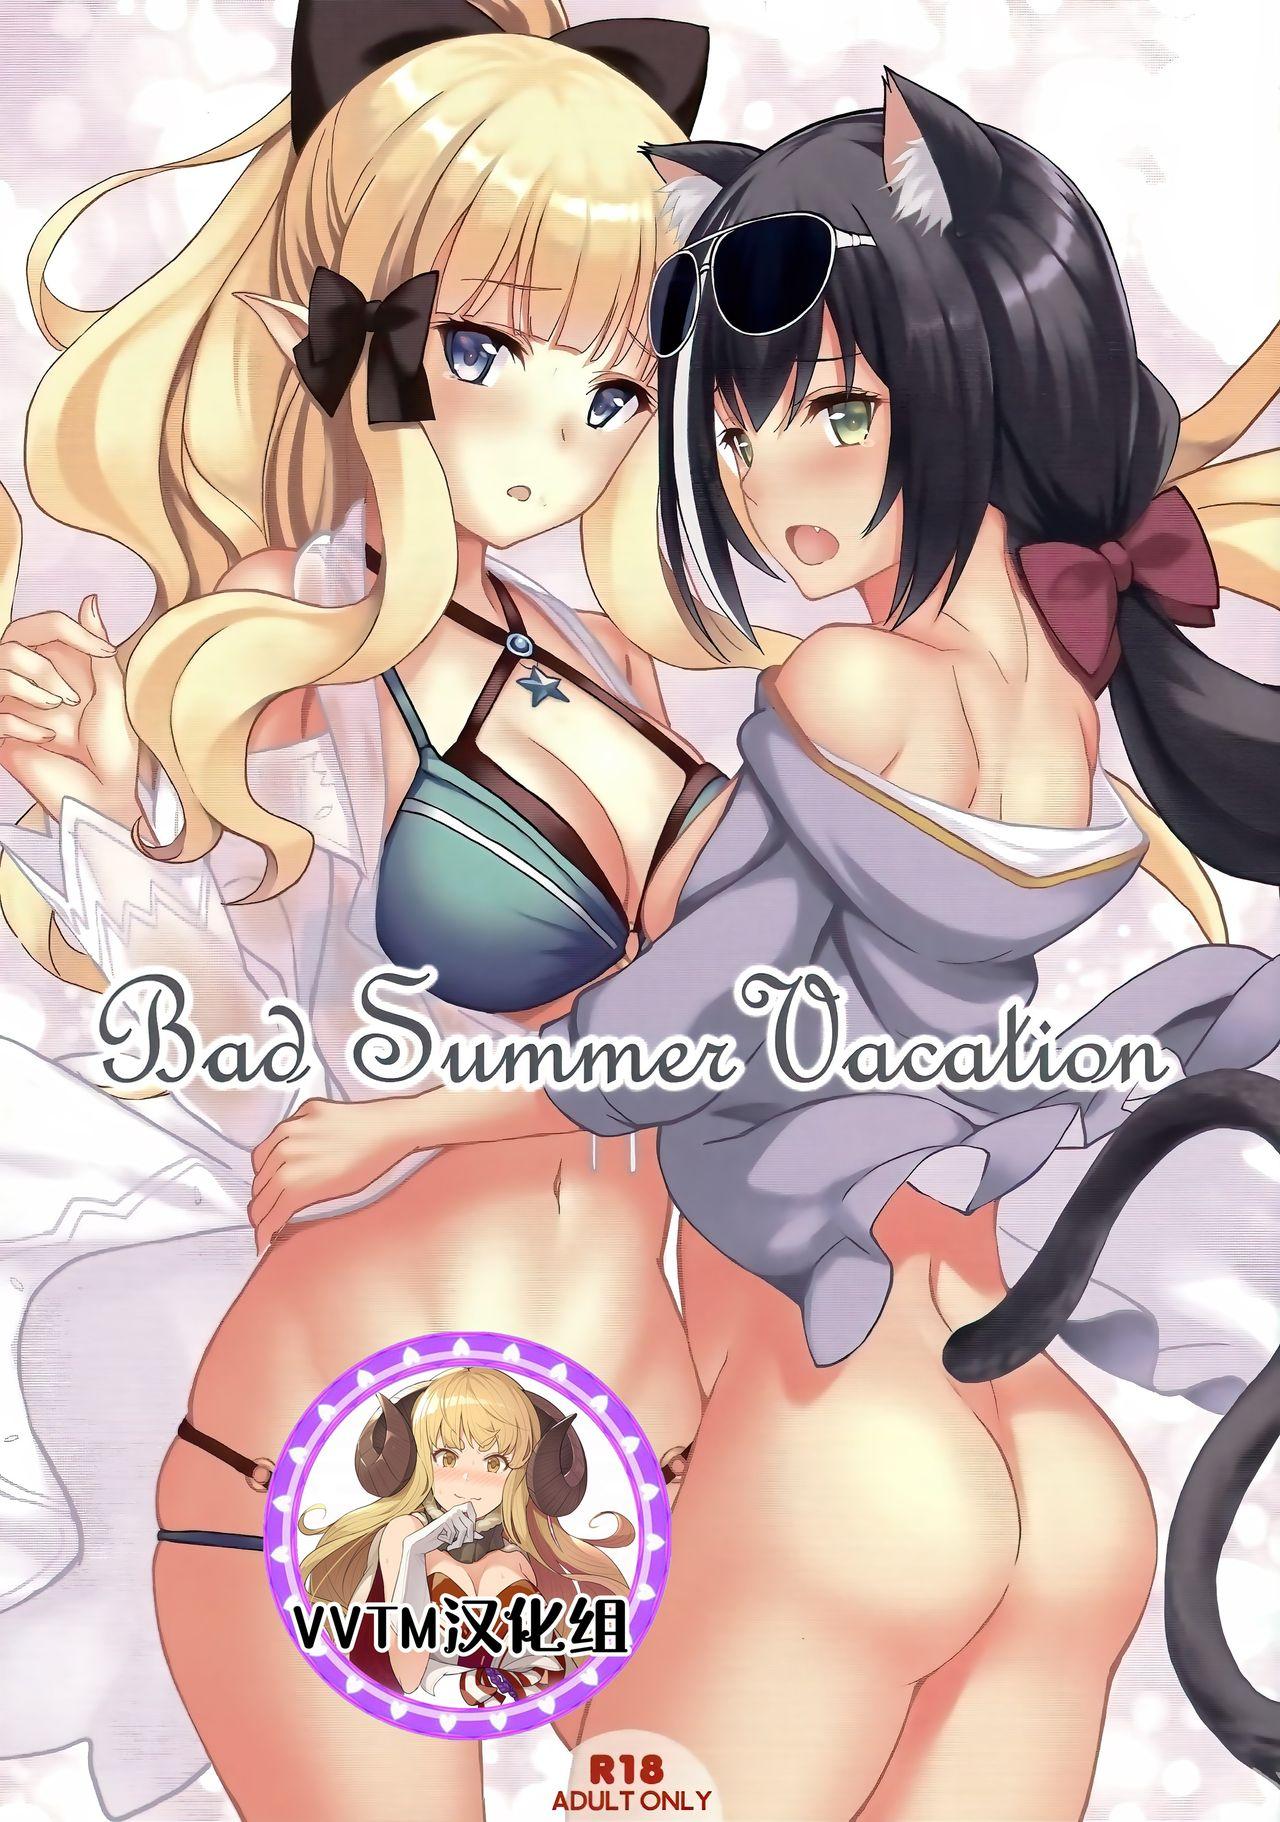 Fake Bad Summer Vacation - Princess connect Australian - Picture 1